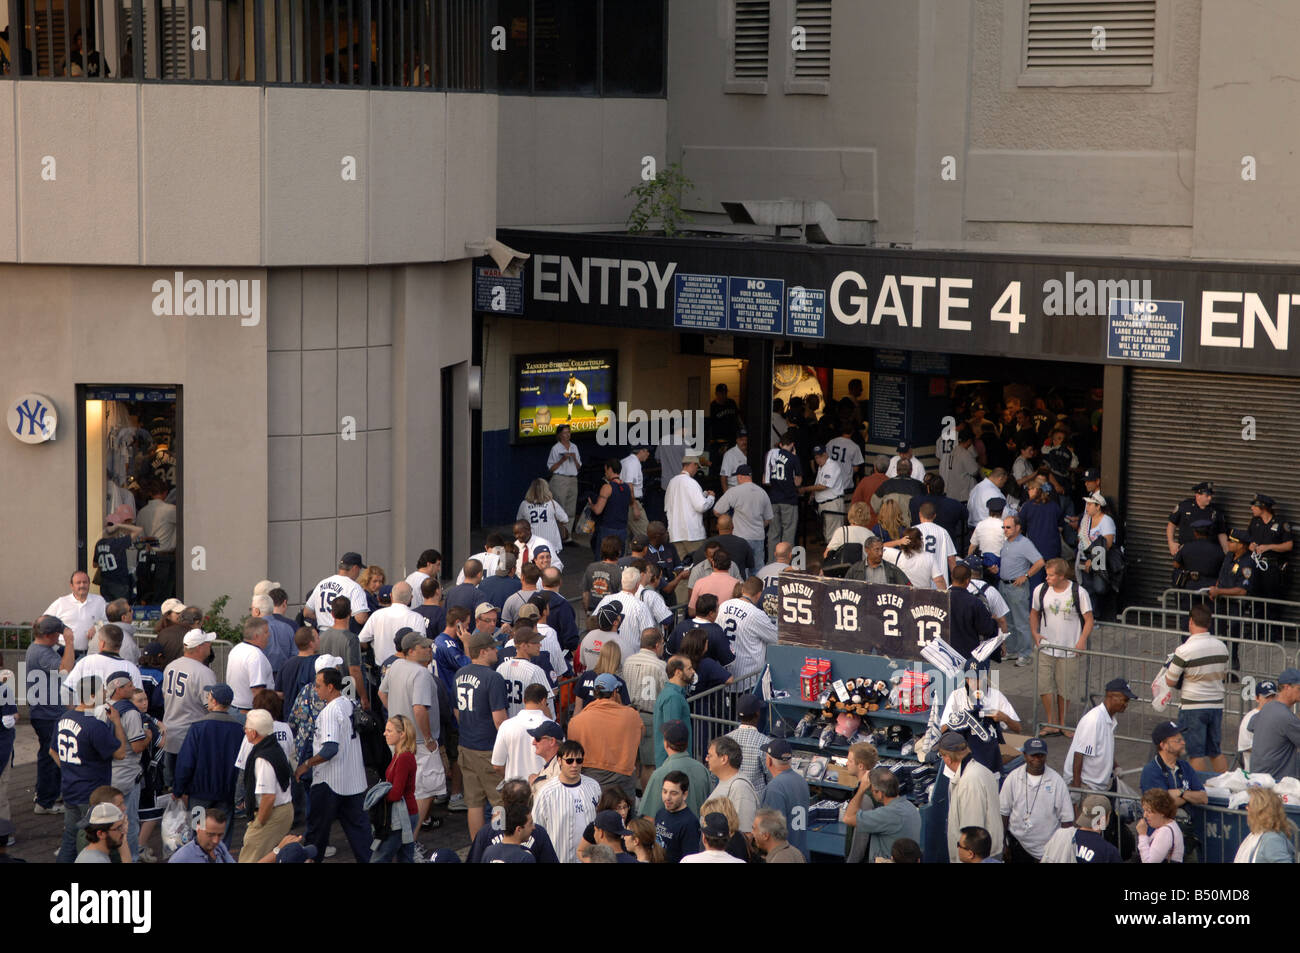 Baseball fans arrive at Yankee Stadium in the New York borough of The Bronx Stock Photo